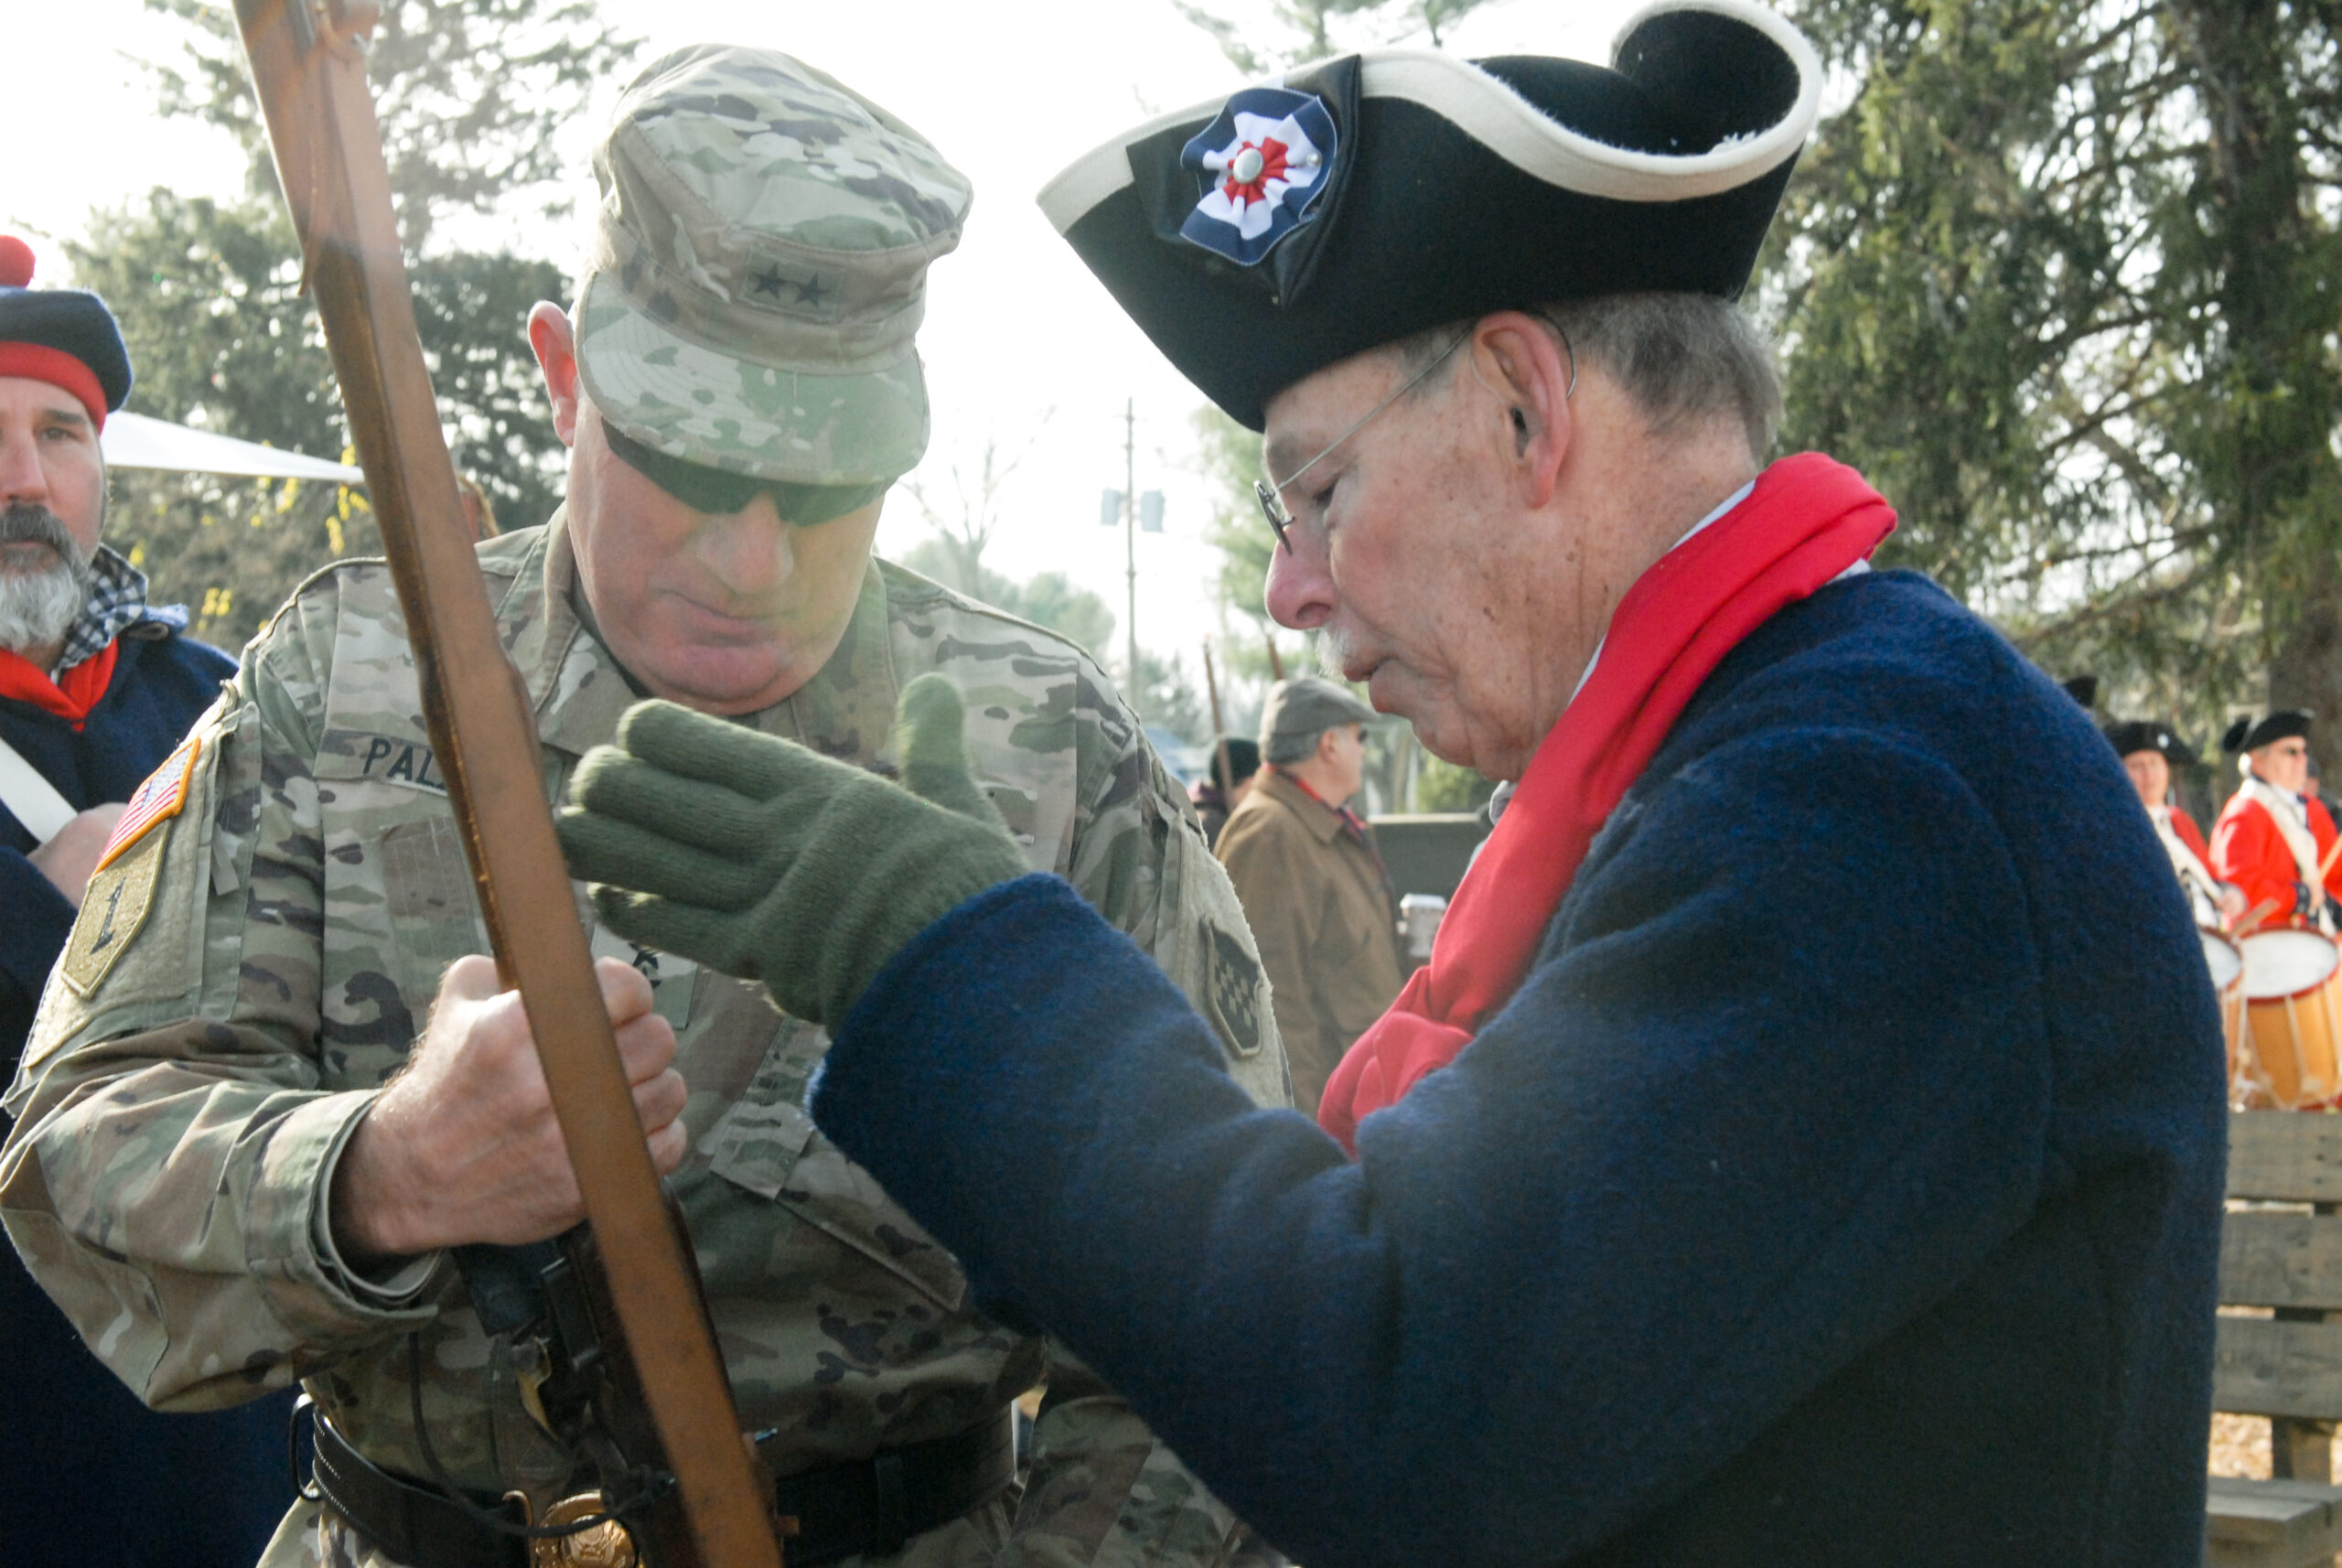 Maj. Gen. Mark Palzer, commanding general of the U.S. Army Reserve’s 99th Readiness Division (left), prepares to fire a musket with help from Army Reserve Ambassador Larry Rubini during the 67th annual re-enactment of Gen. George Washington crossing the Delaware River Dec.8 at Washington Crossing Historic Park in Washington Crossing, Pennsylvania. This event commemorates Washington’s actual crossing Dec. 25-26, 1776, when he led several thousand troops across the icy river to conduct a surprise attack on enemy forces in Trenton.